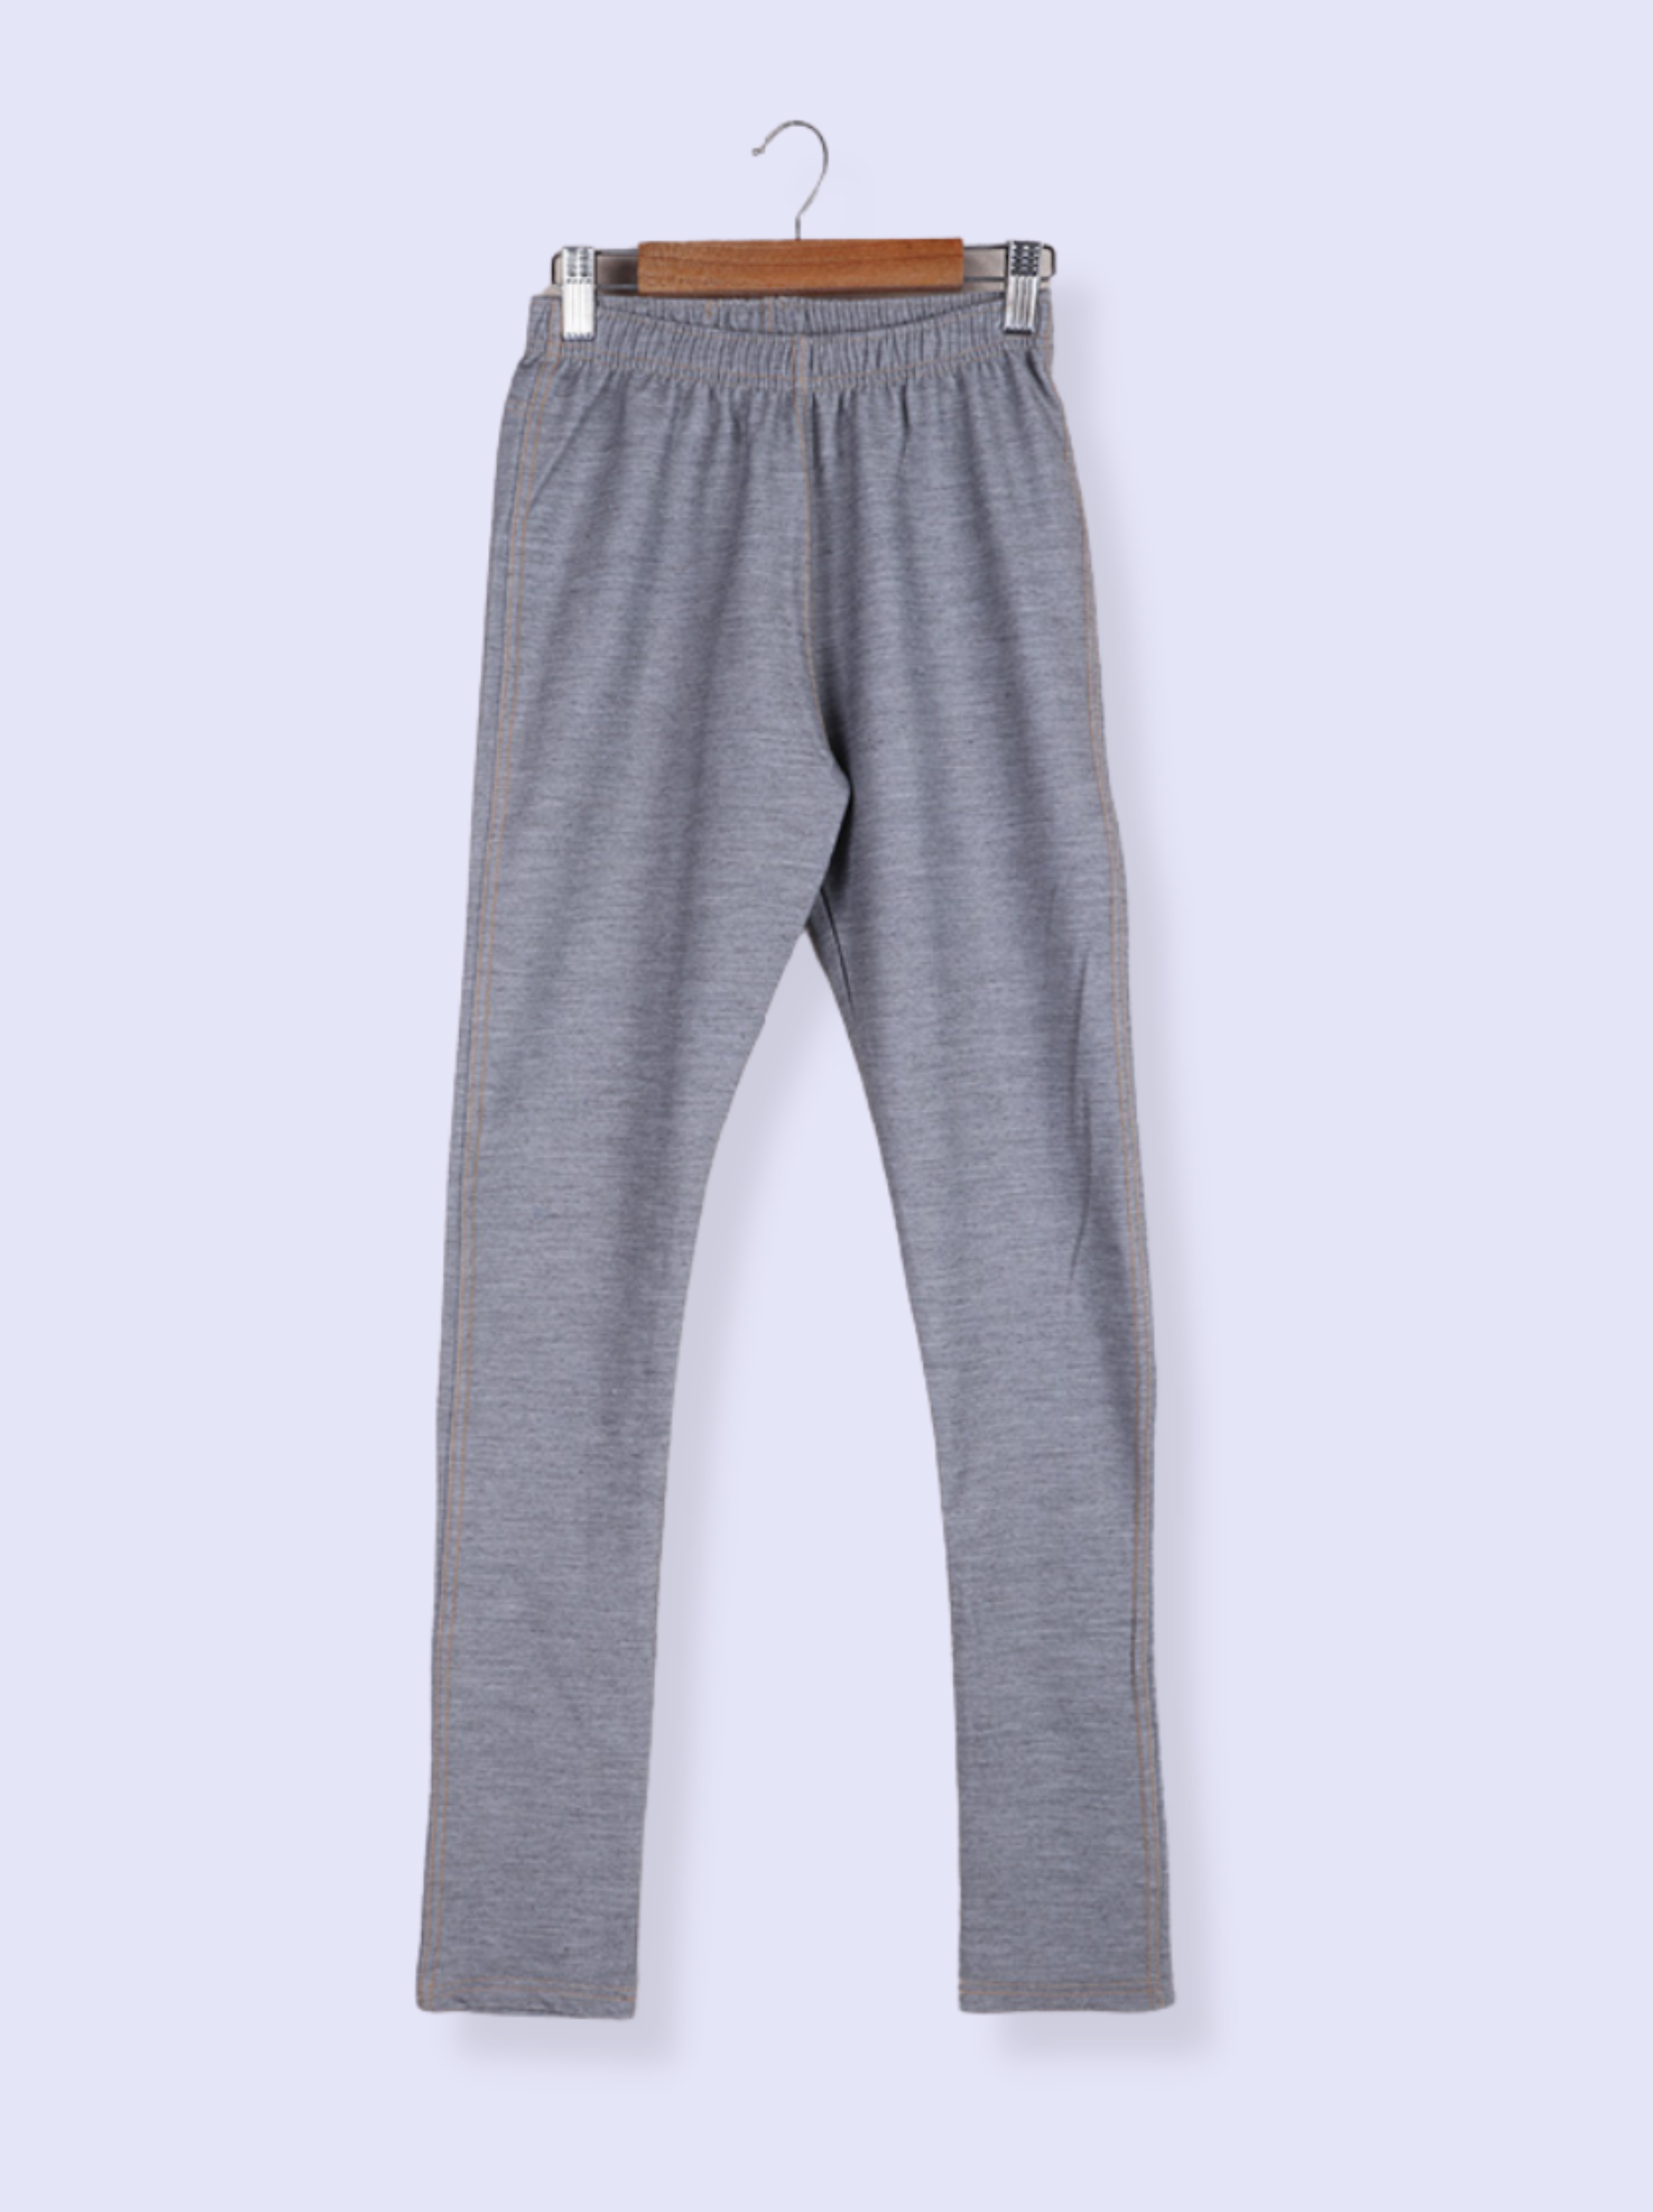 Womens Grey cotton spandex knit Solid Pant